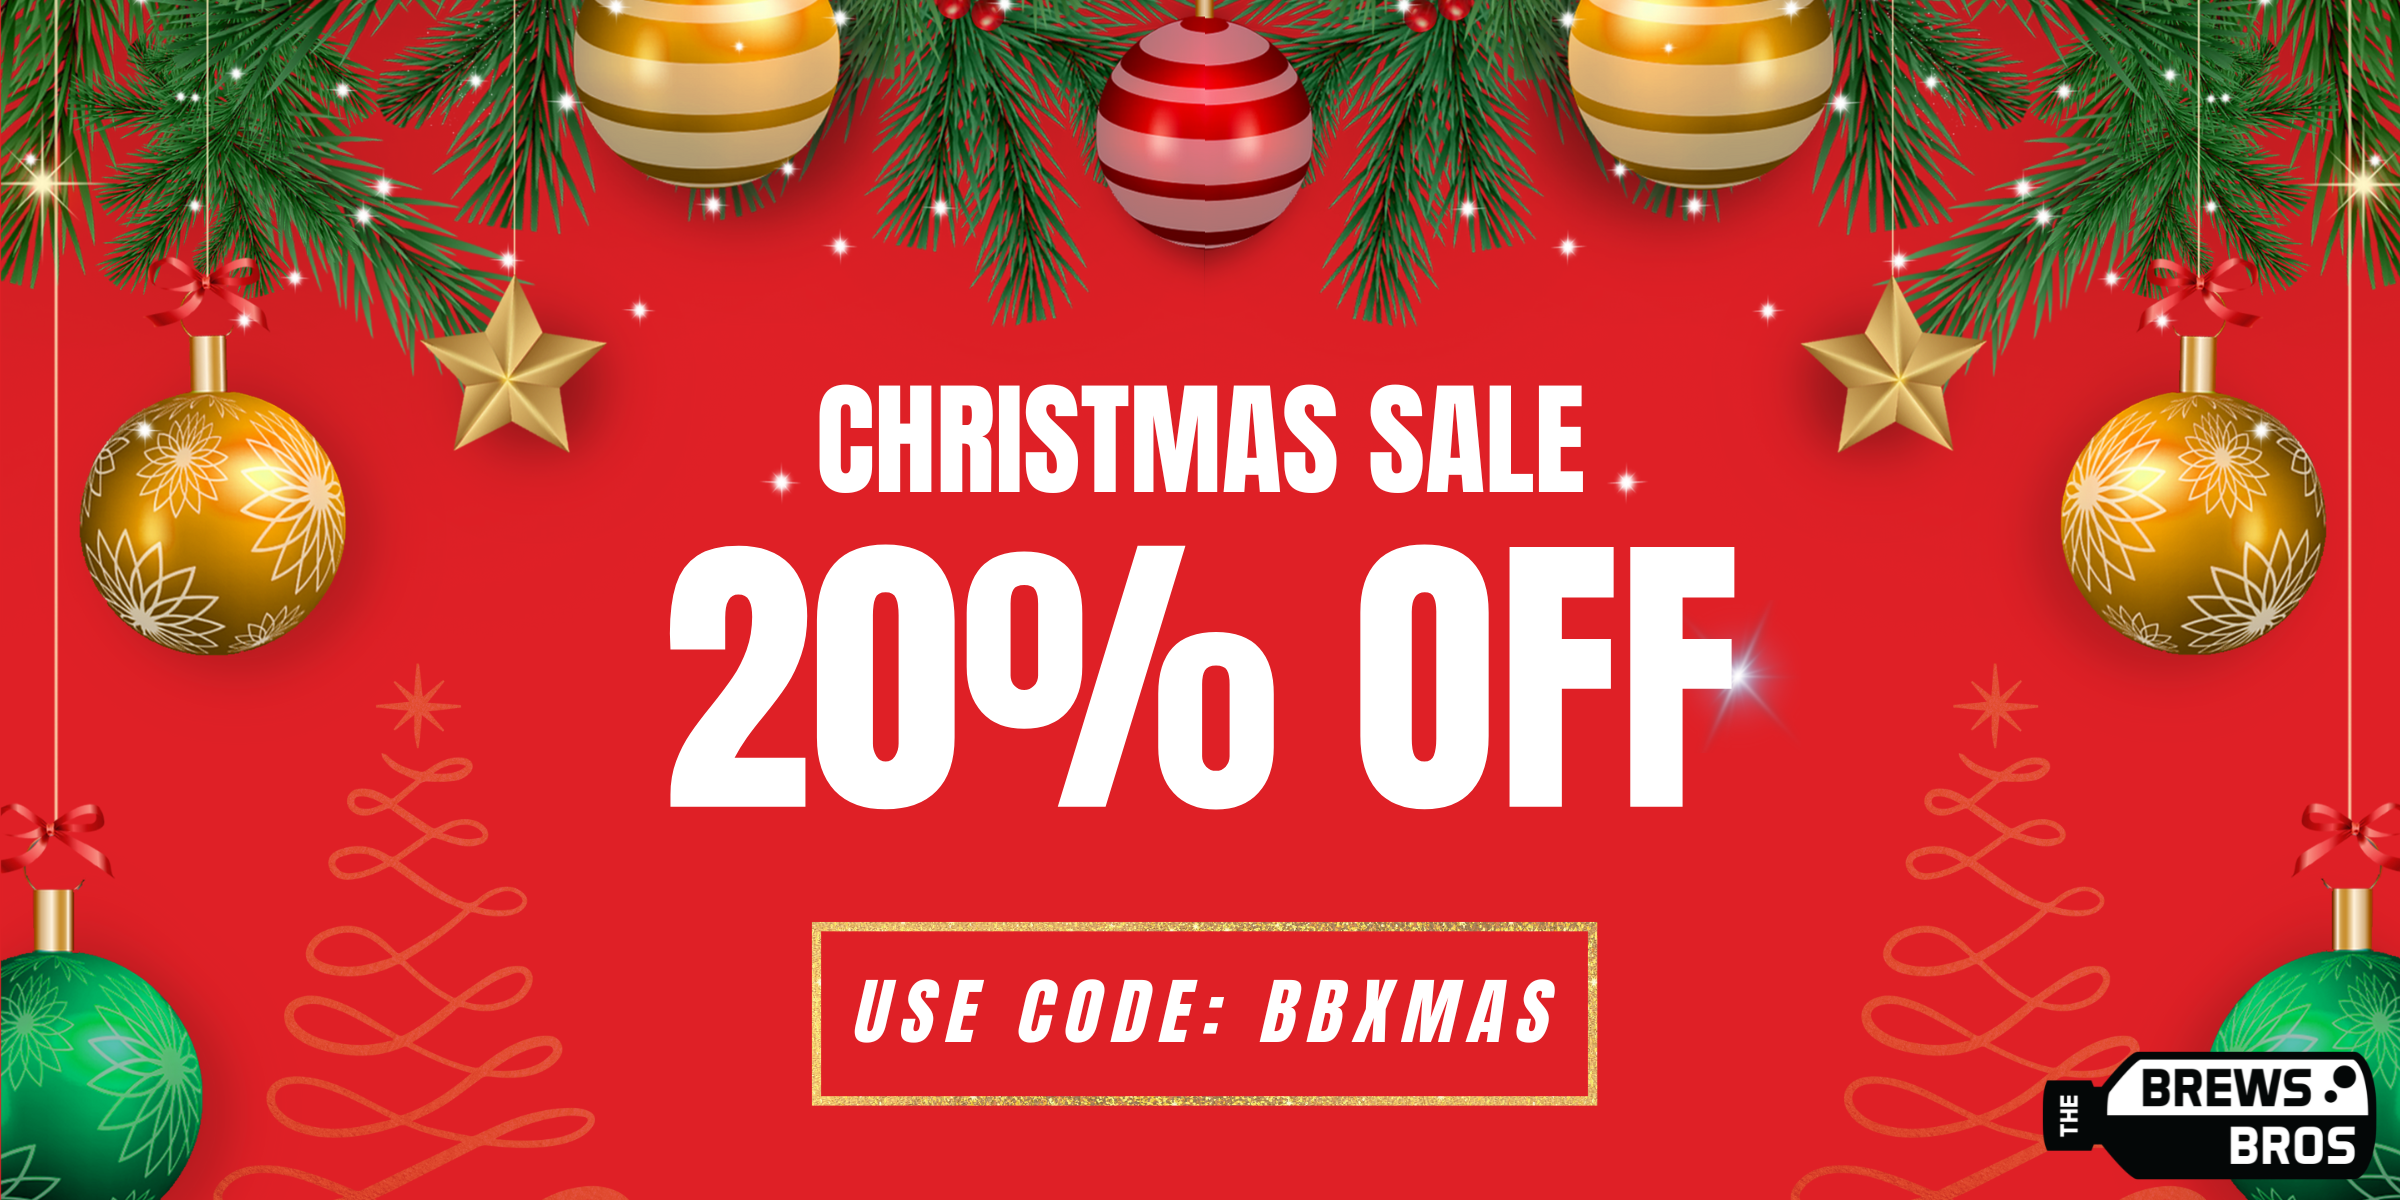 Red and Gold Elegant Classy Christmas Sale Instagram Post (2400 x 1200 px).png